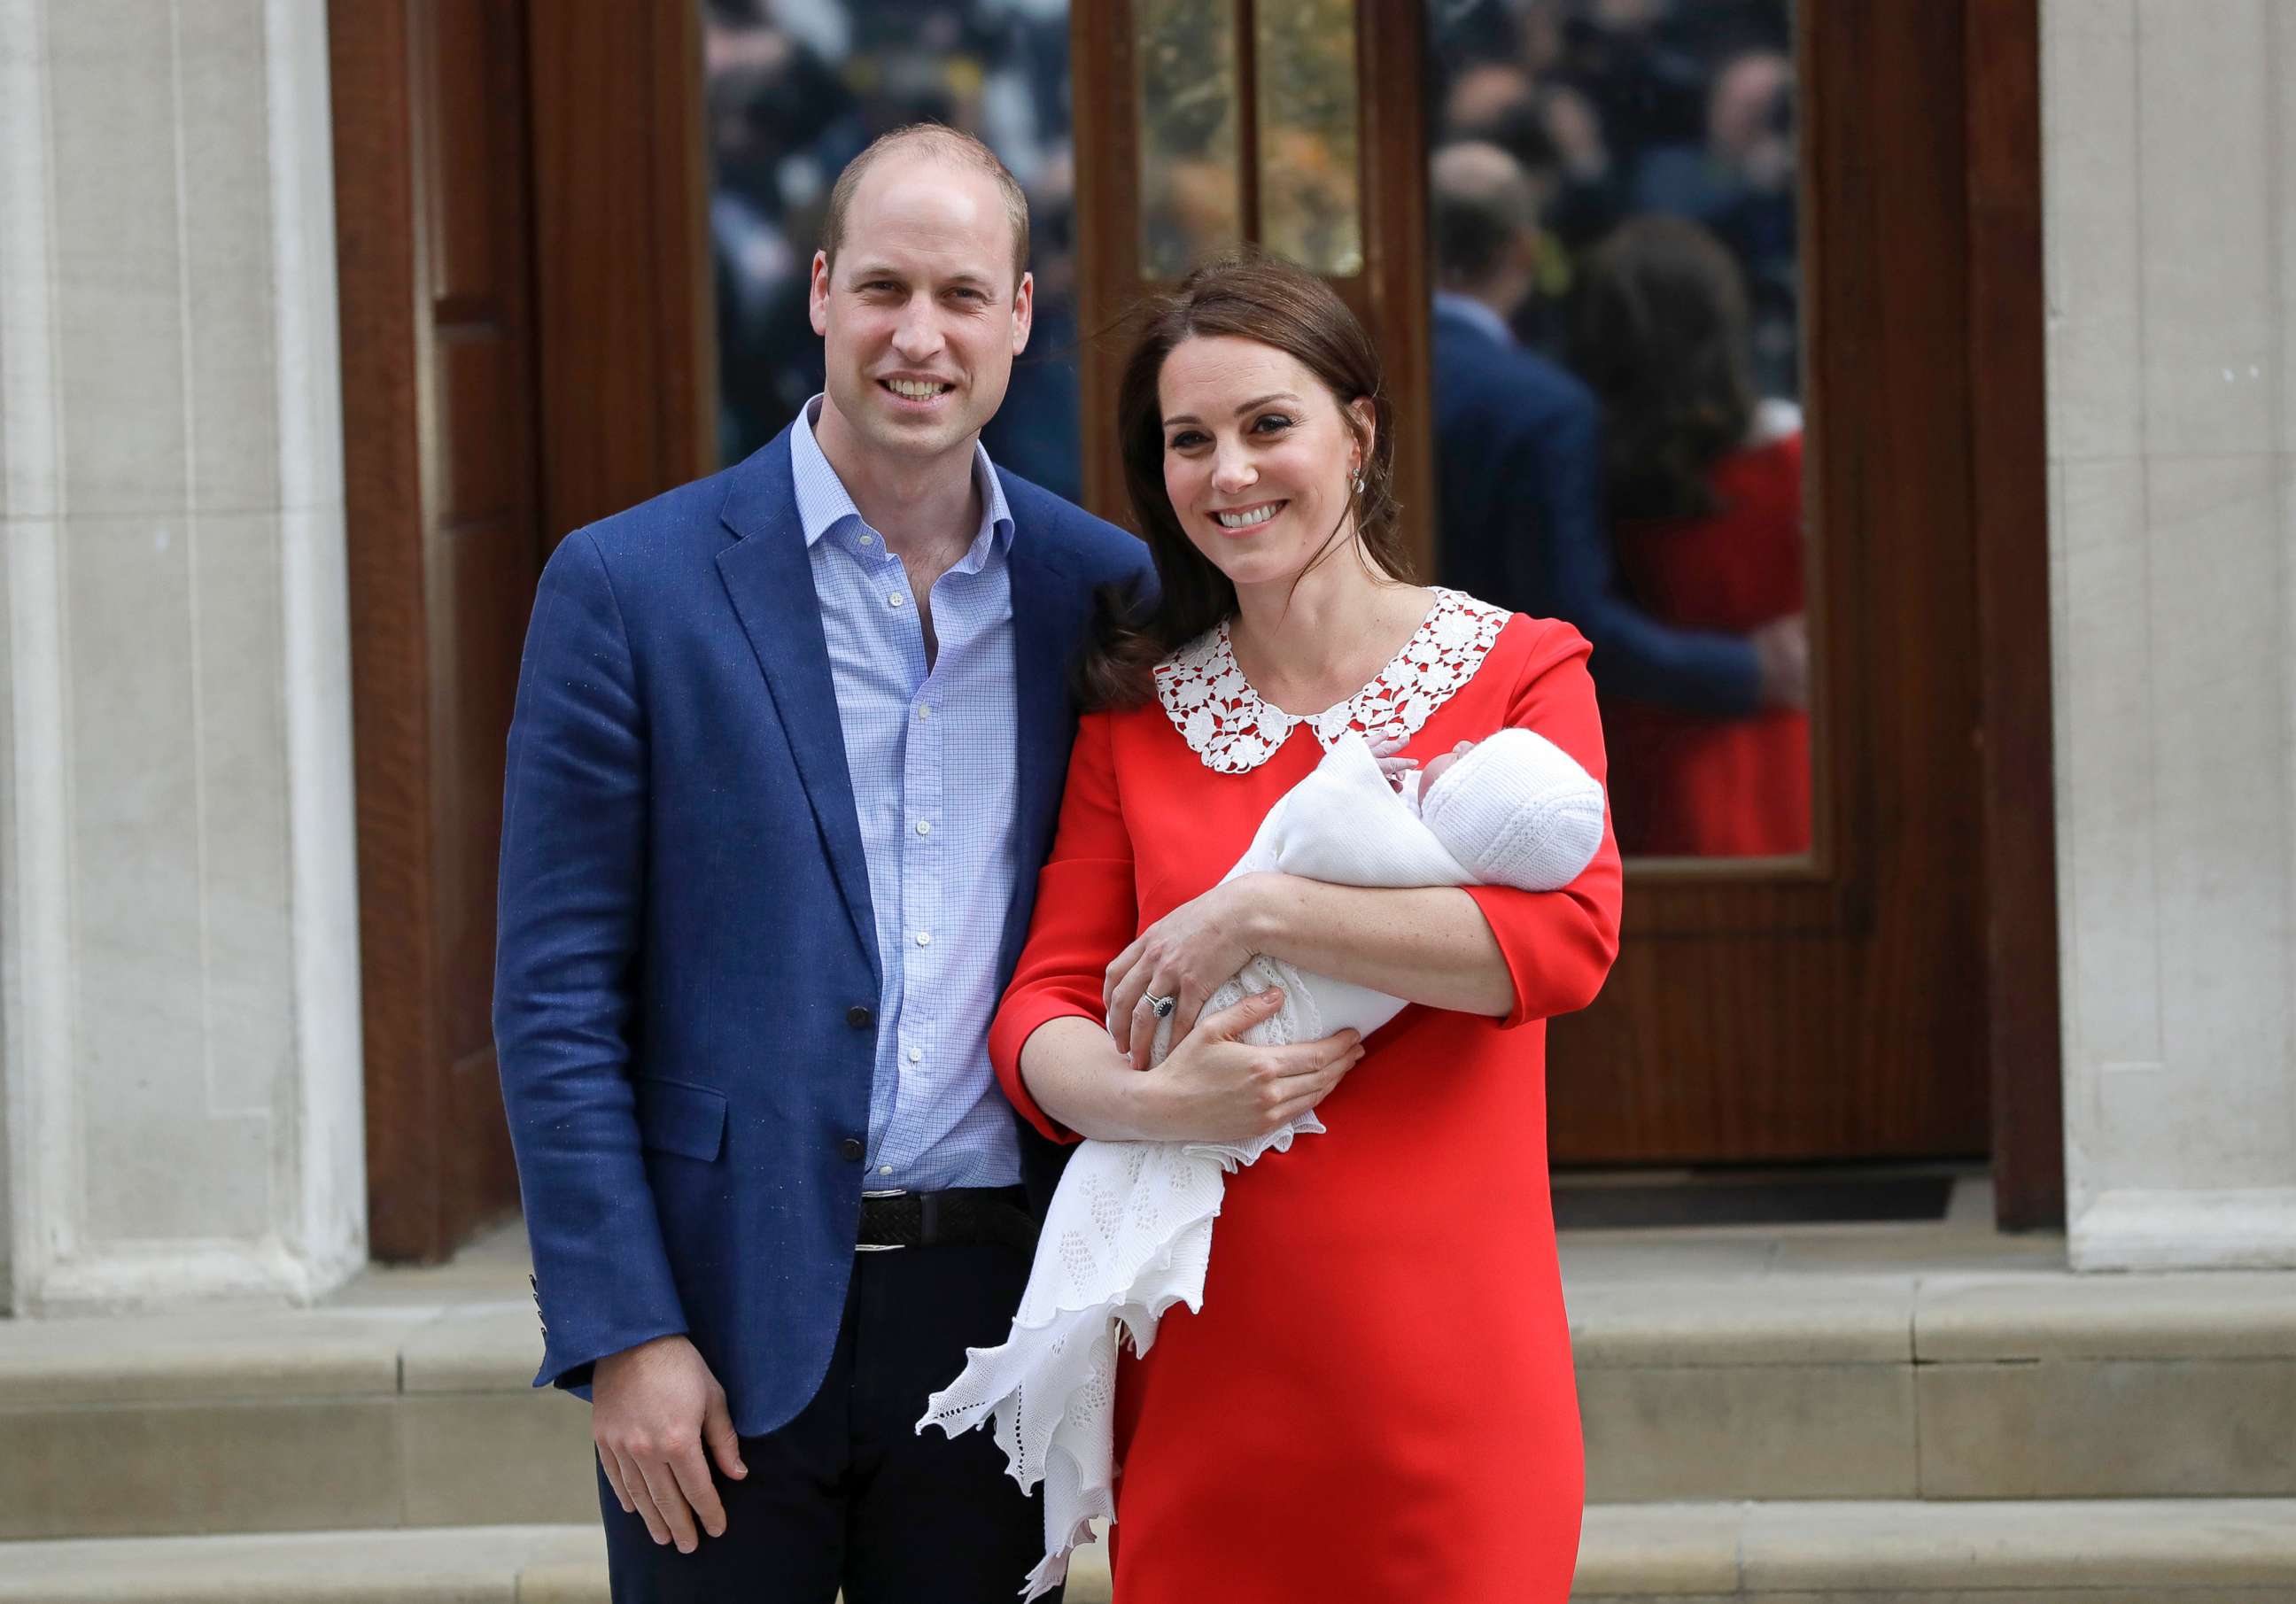 PHOTO: Britain's Prince William and Kate, Duchess of Cambridge pose for a photo with their newborn baby son as they leave the Lindo wing at St Mary's Hospital in London, April 23, 2018.